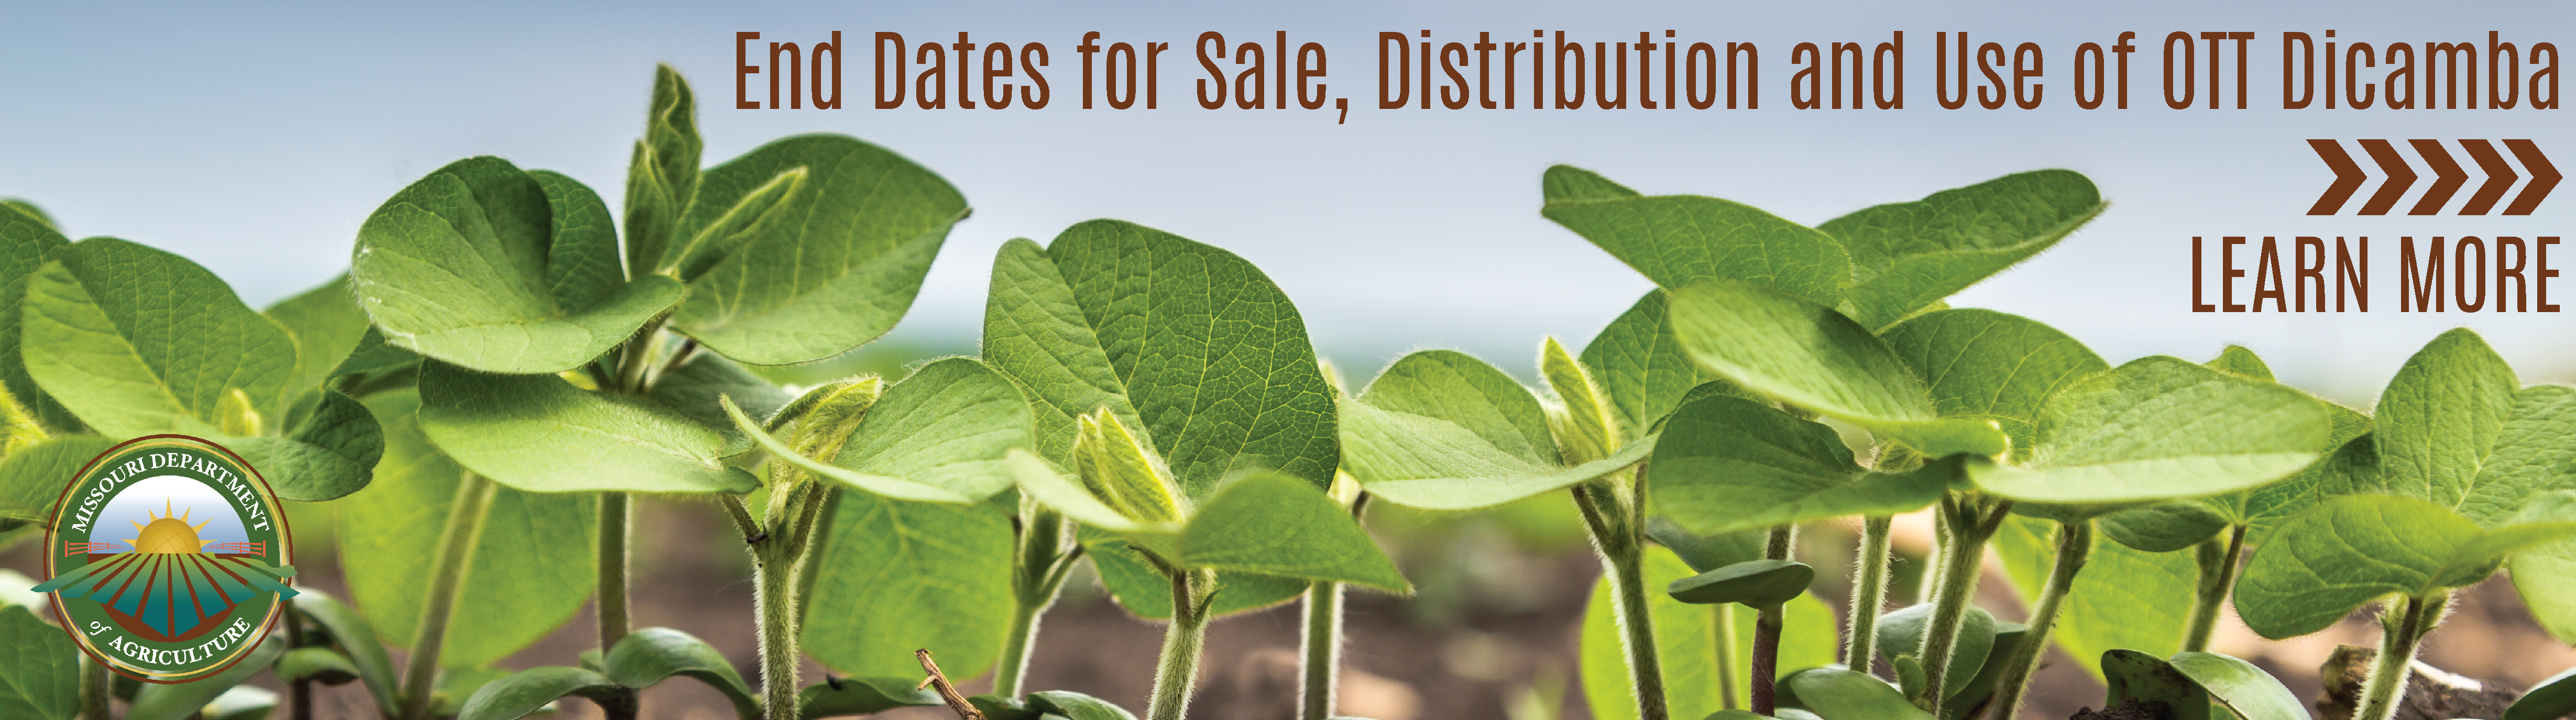 End Dates for Sale, Distribution and Use of OTT Dicamba